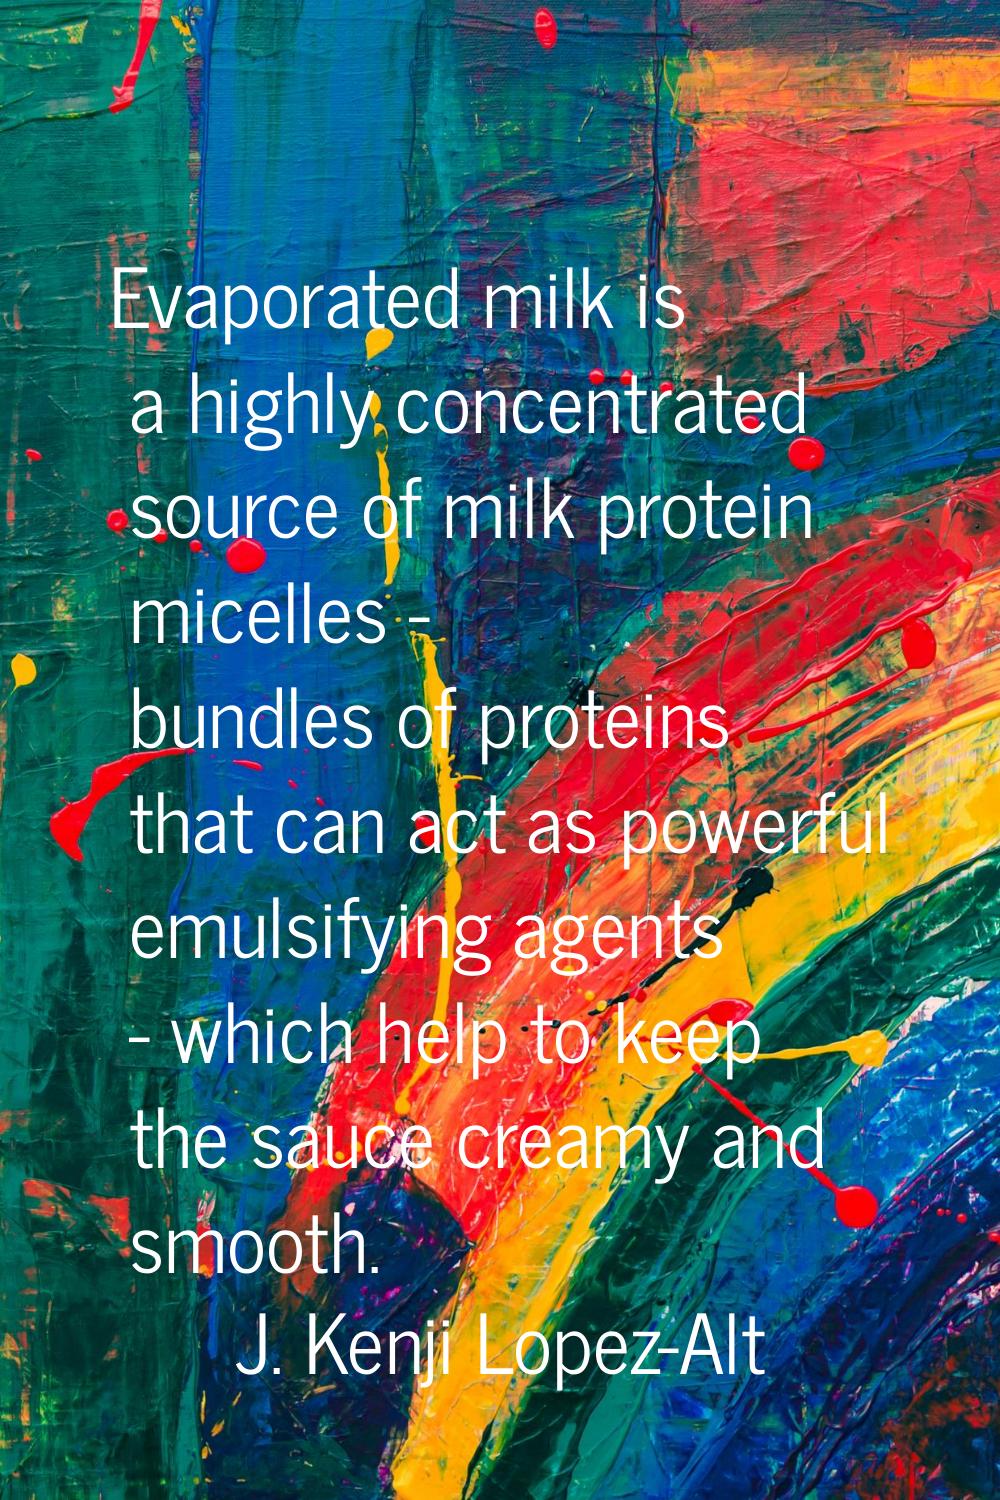 Evaporated milk is a highly concentrated source of milk protein micelles - bundles of proteins that